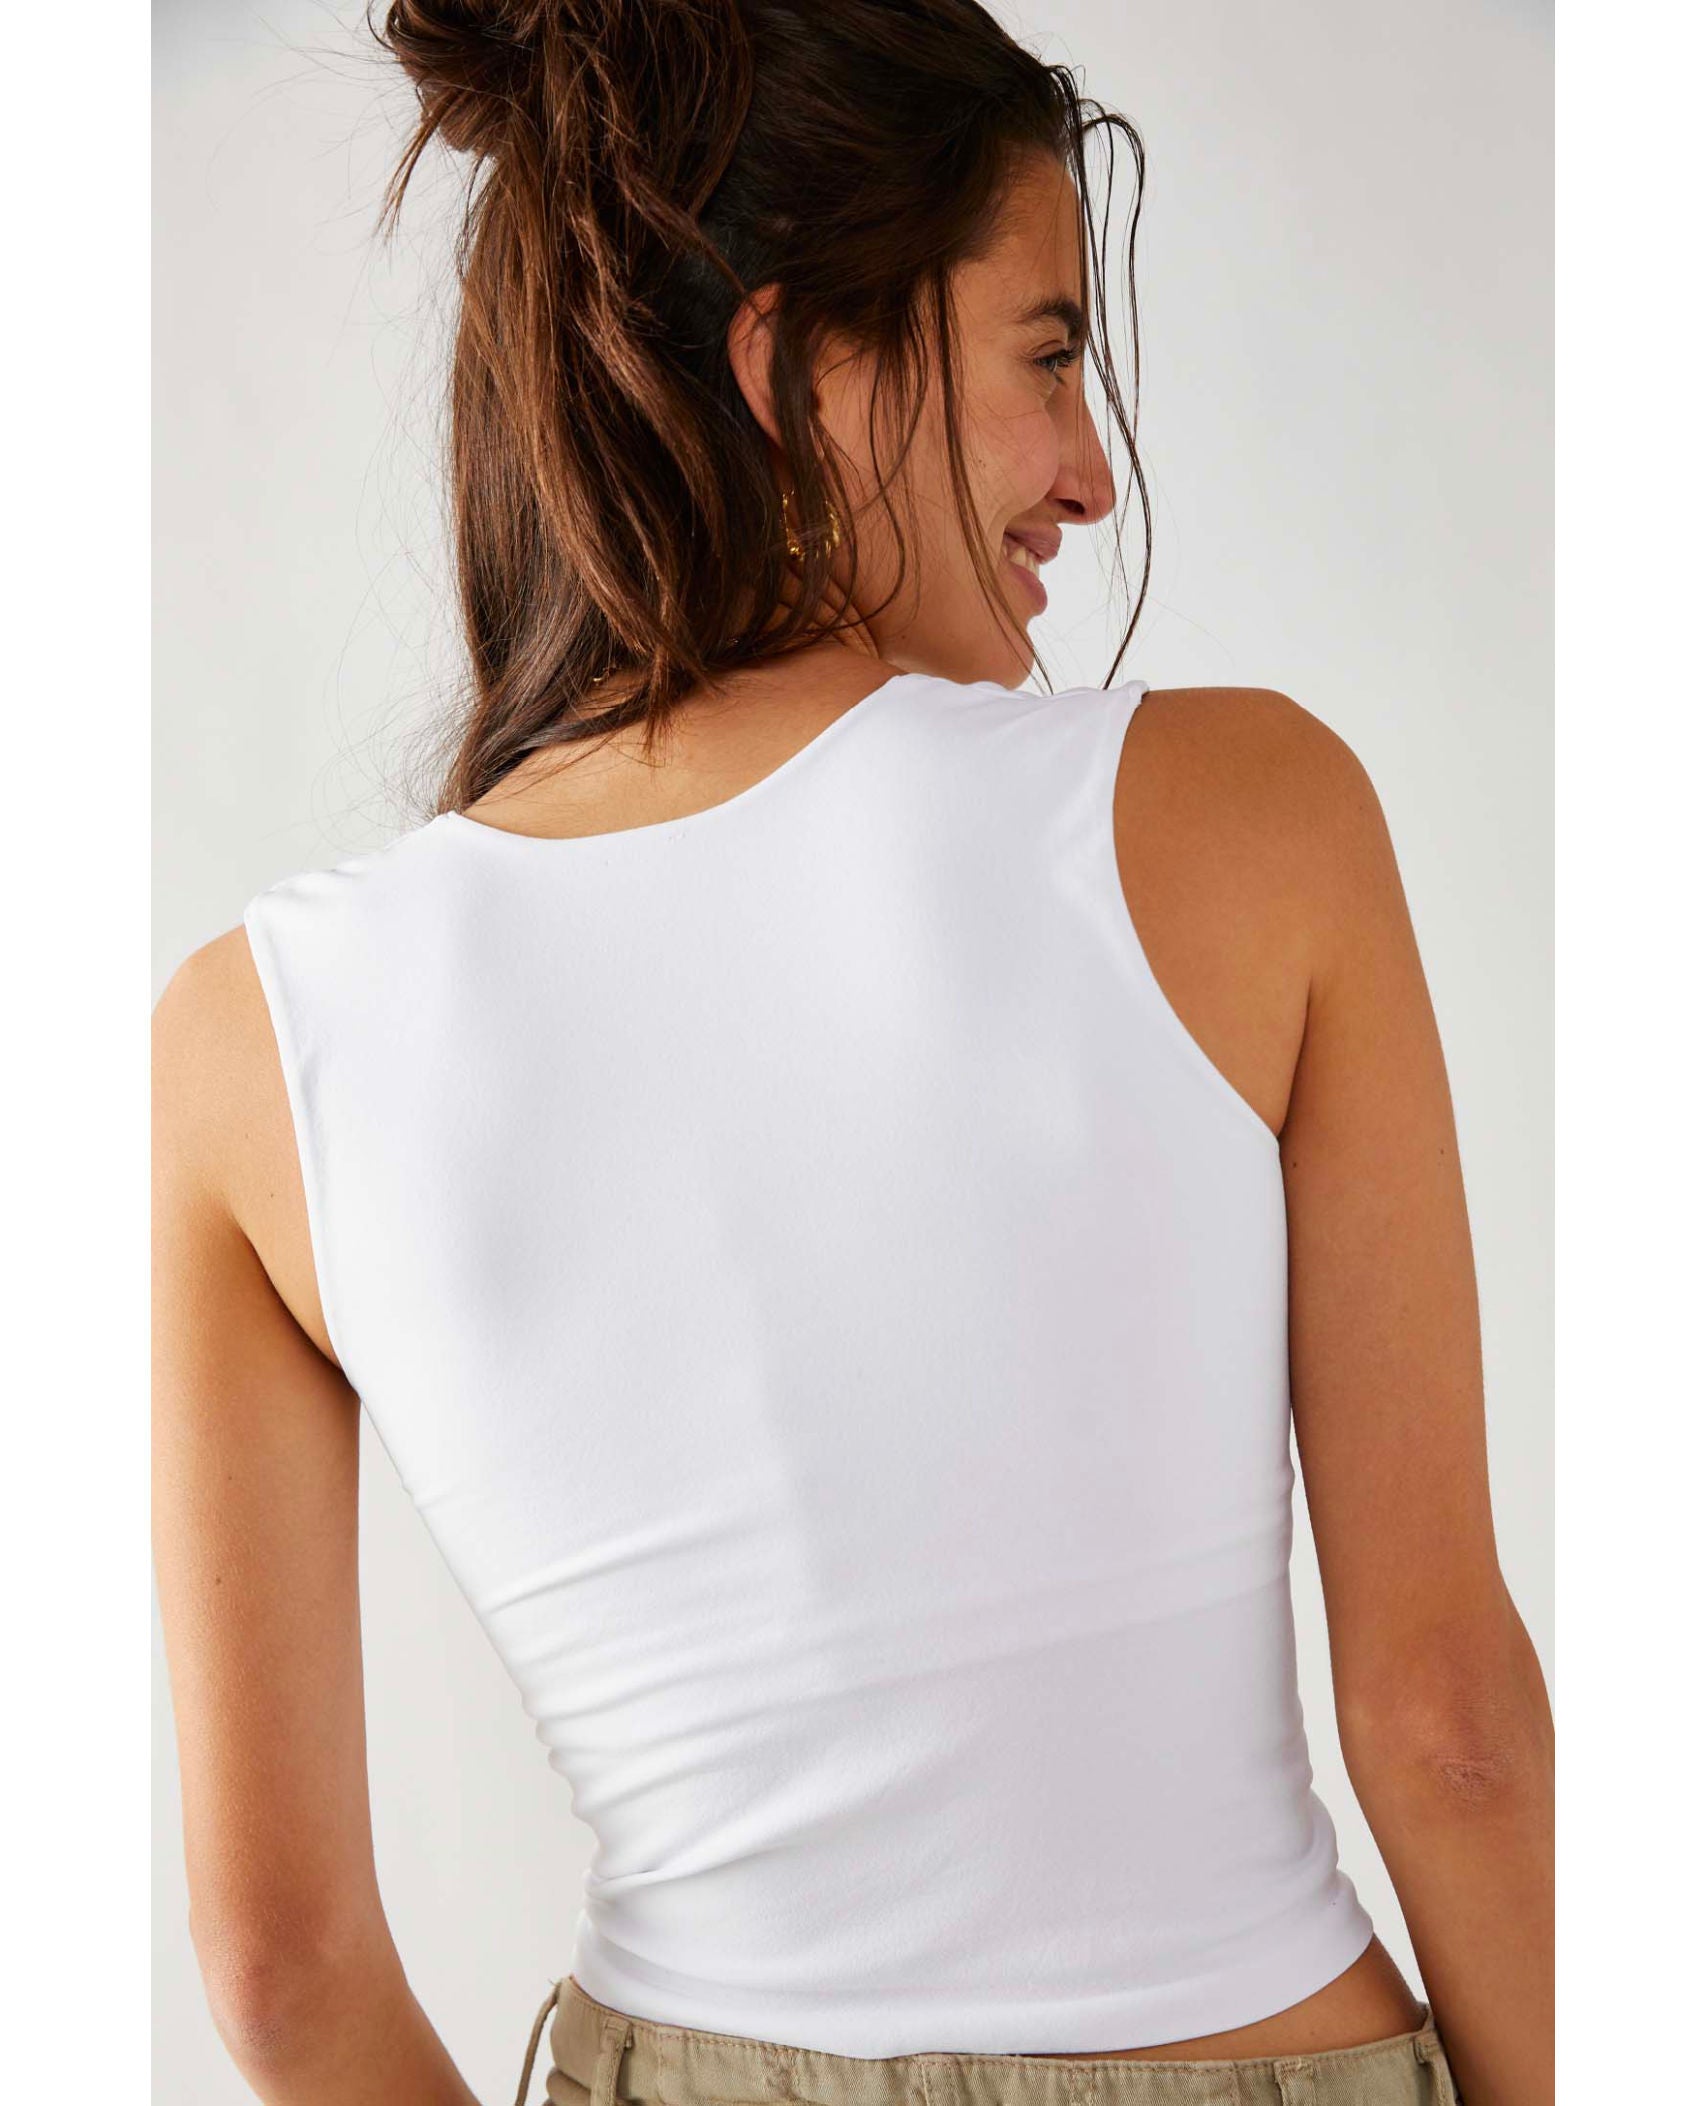 Clean Lines Muscle Cami White